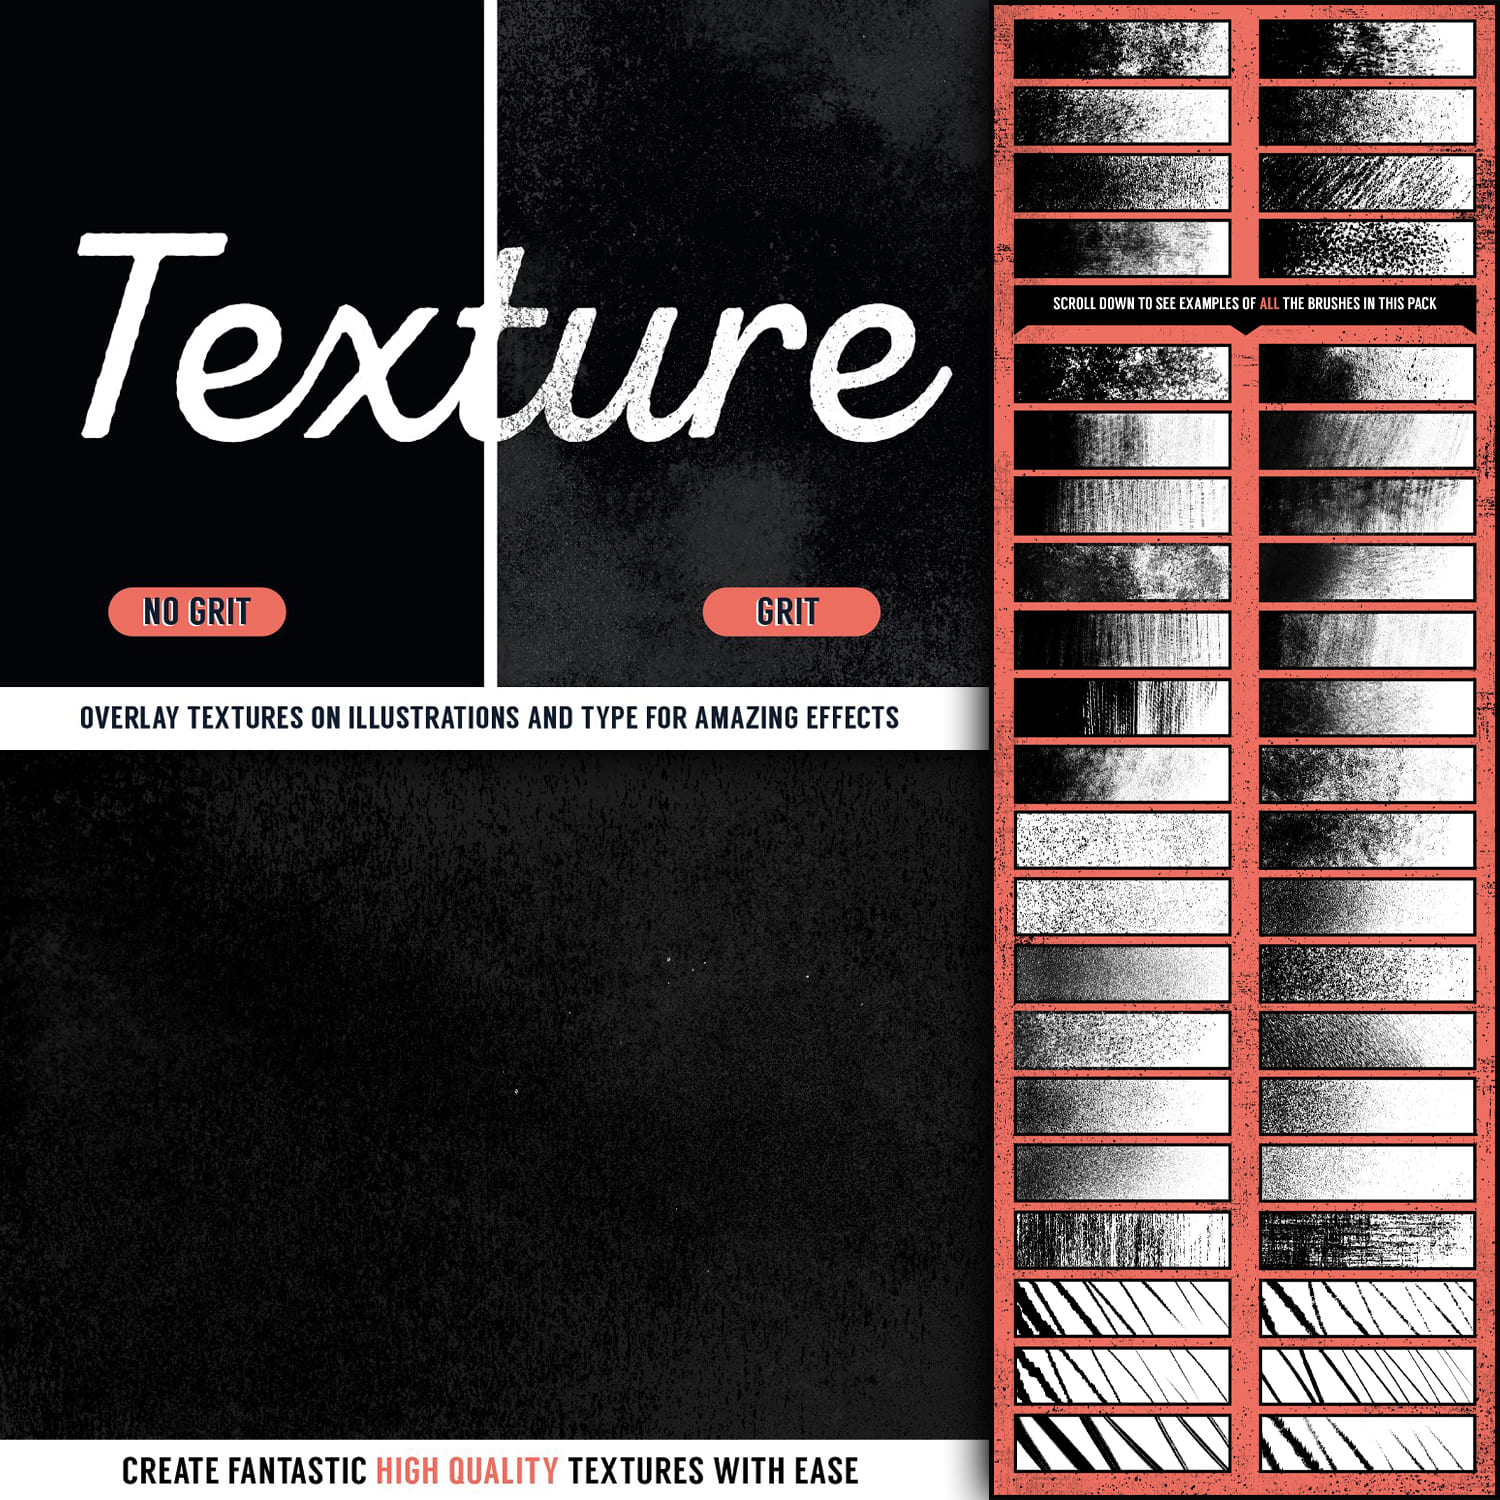 GRIT Texture Brushes for Procreate cover.